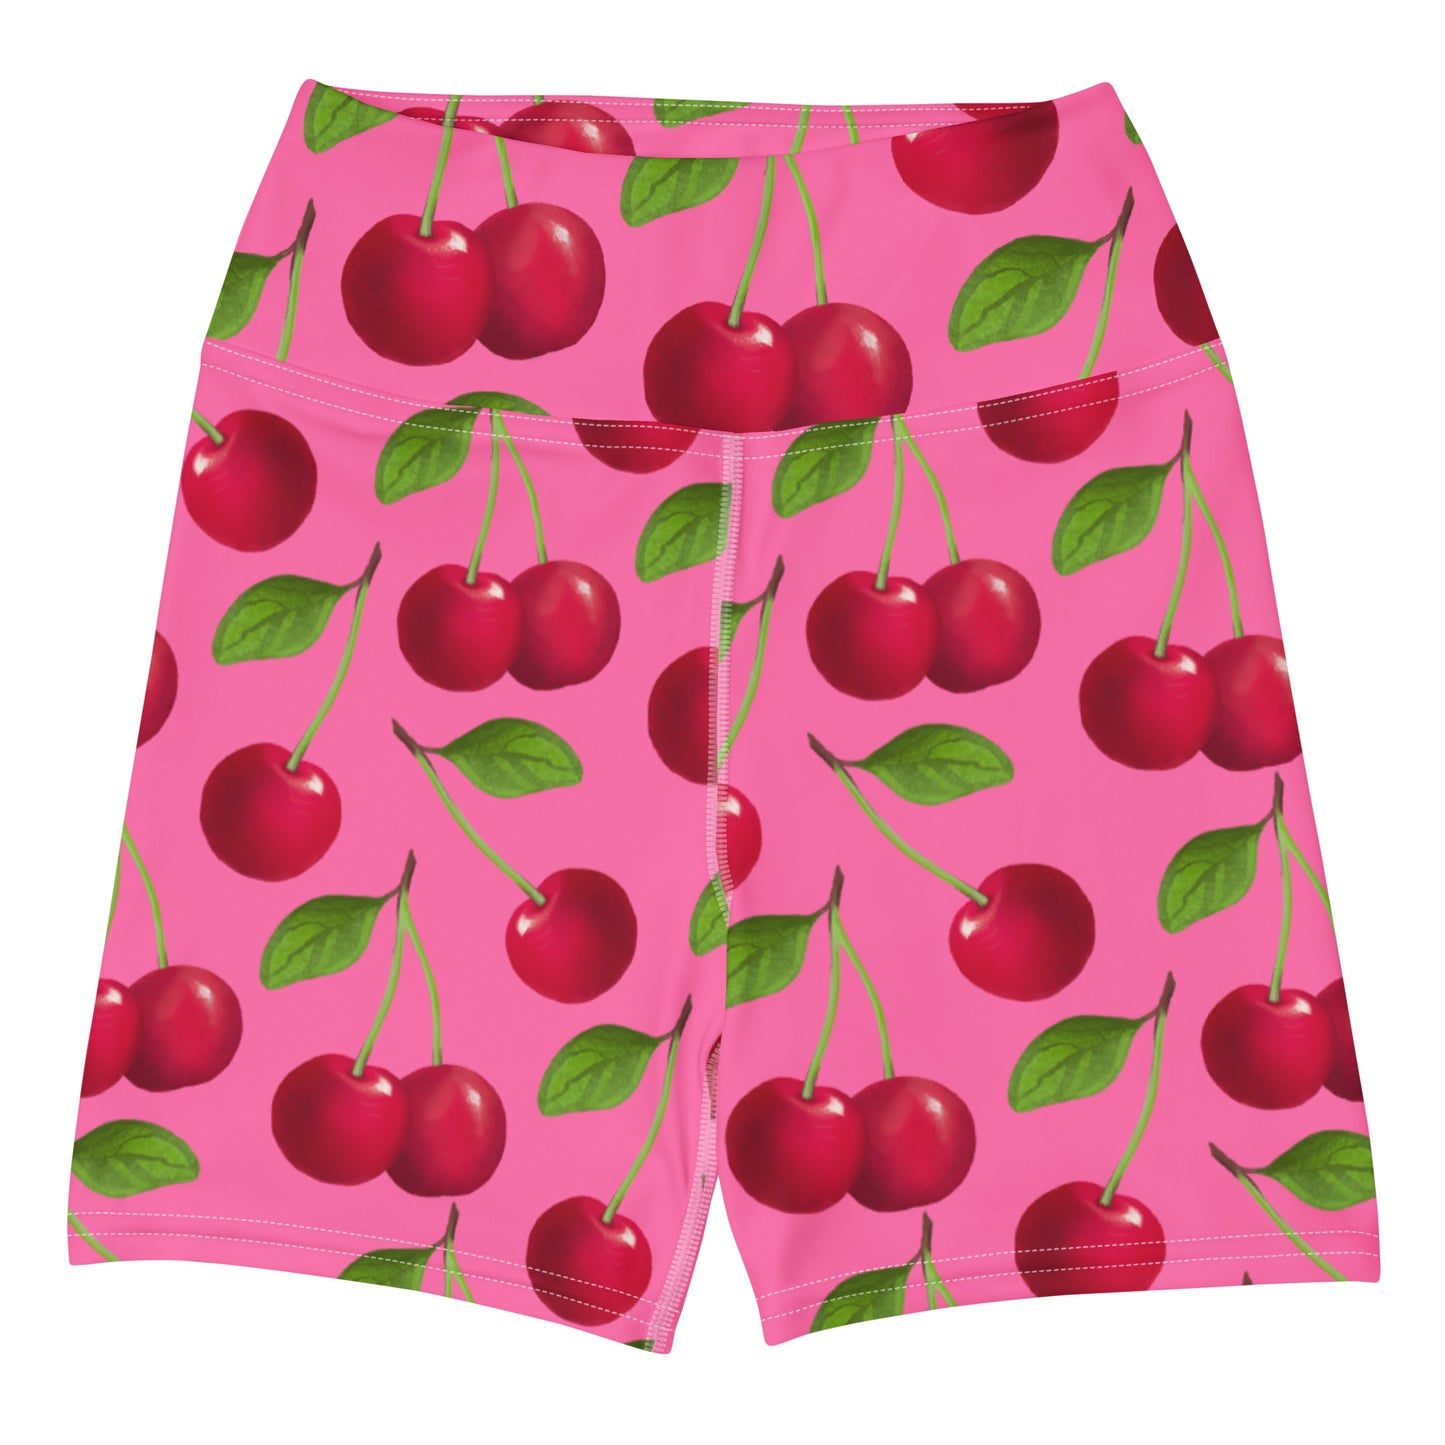 Mon Cherie Pink High Waisted Shorts